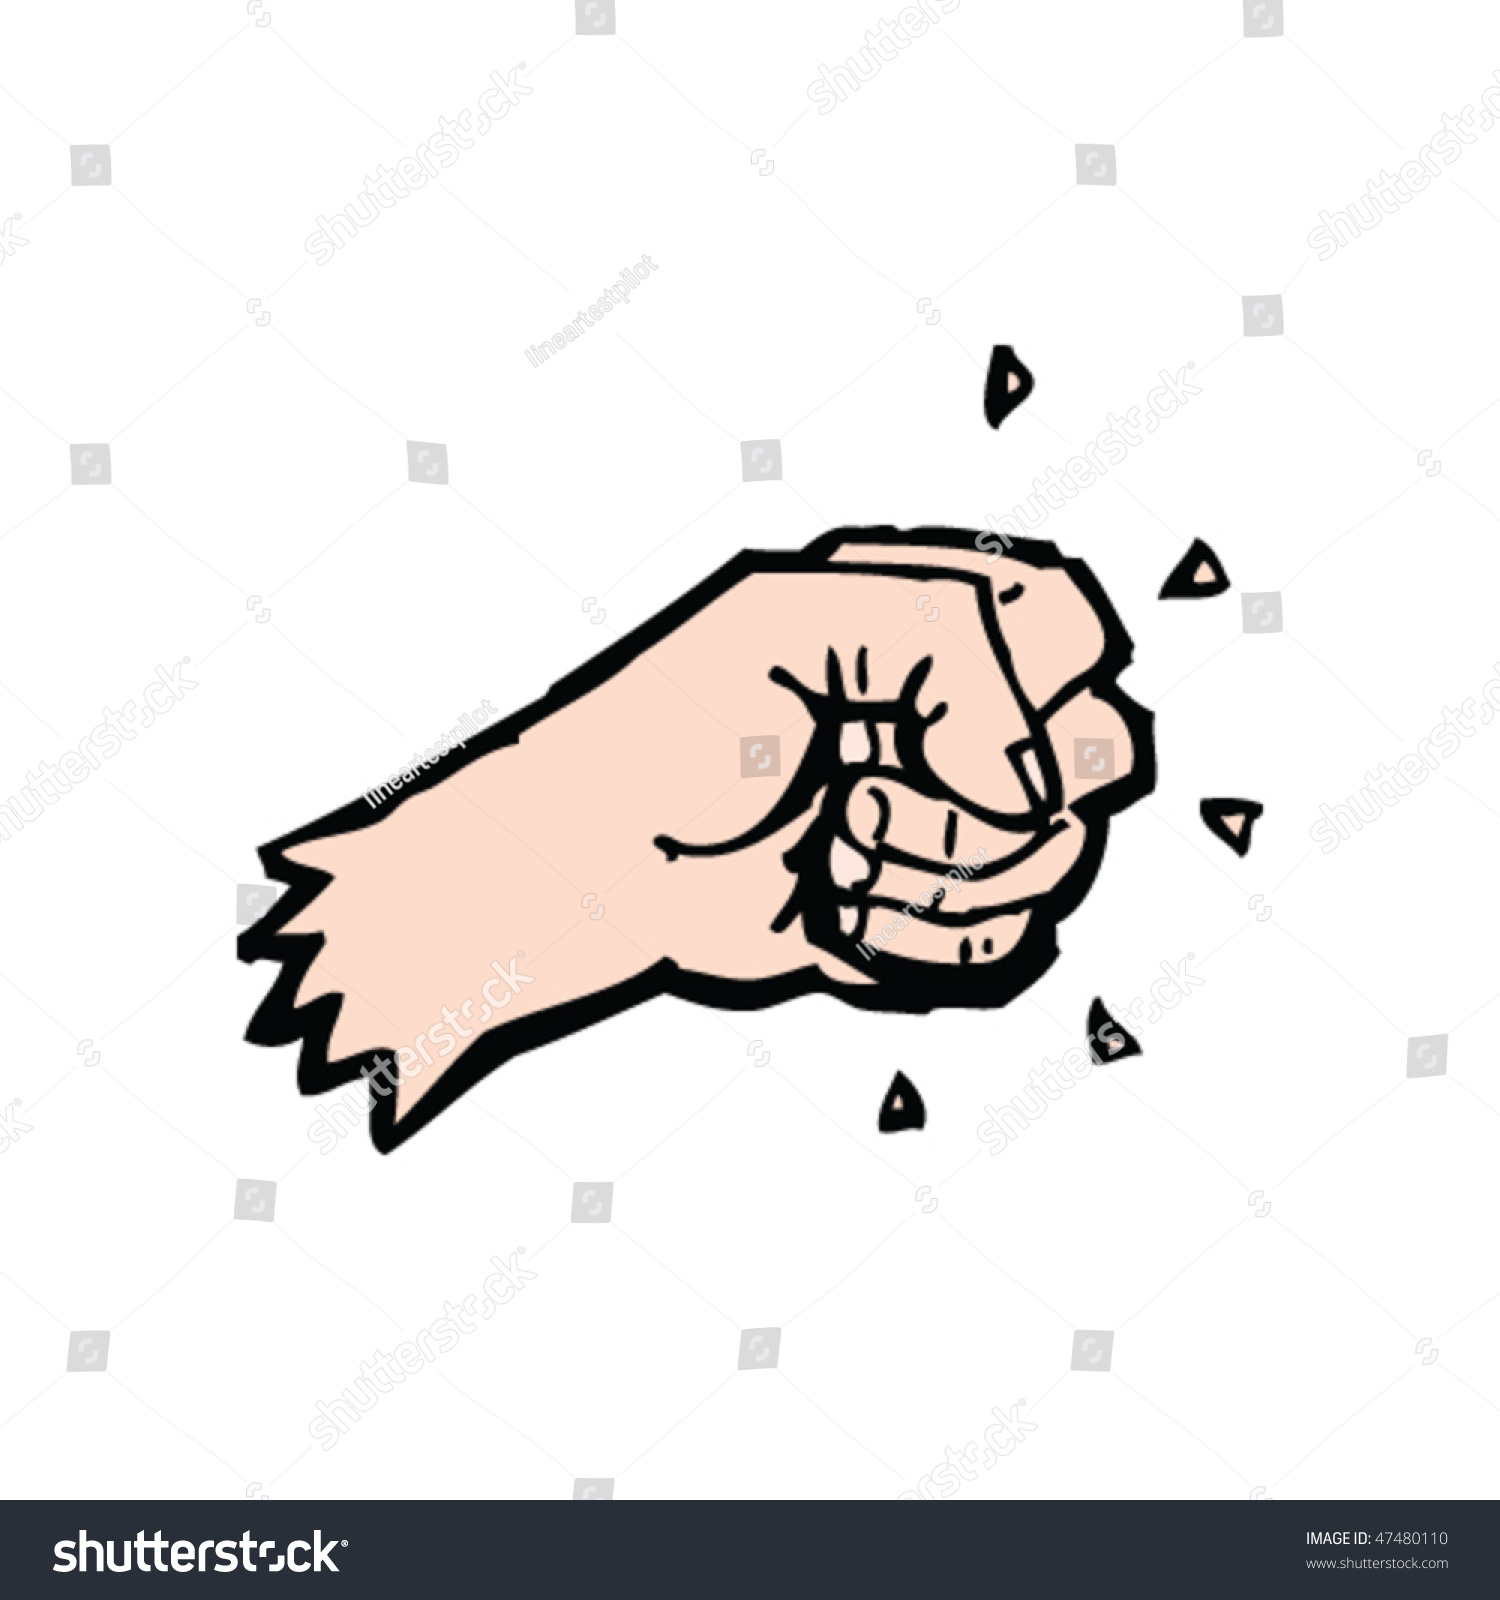 Drawing Of A Clenched Fist Stock Vector Illustration 47480110